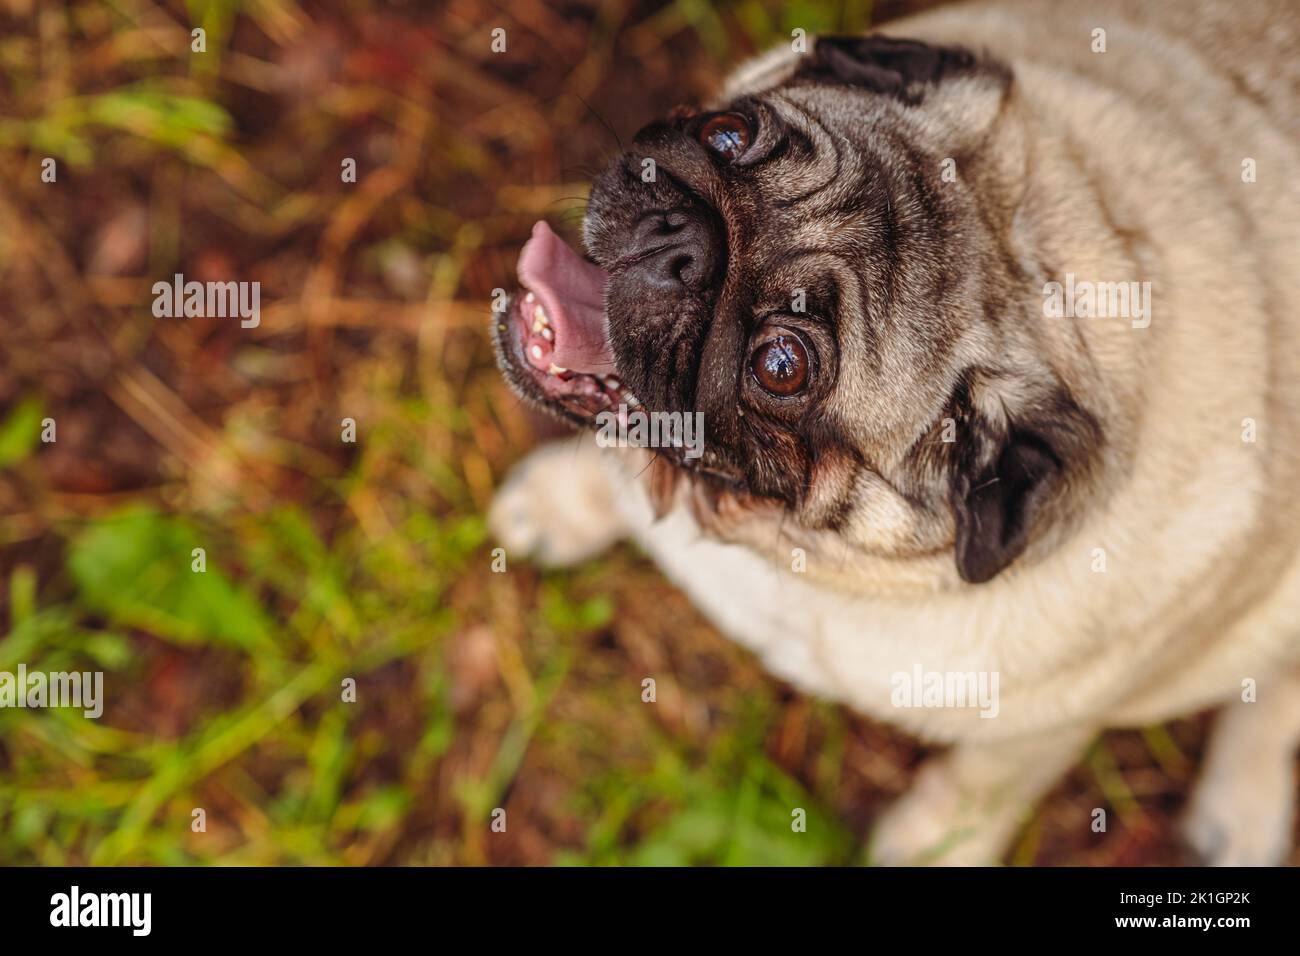 Pug dog with an open mouth and his tongue sticking out.and sitting in the grass of the forest on a sunny day Stock Photo